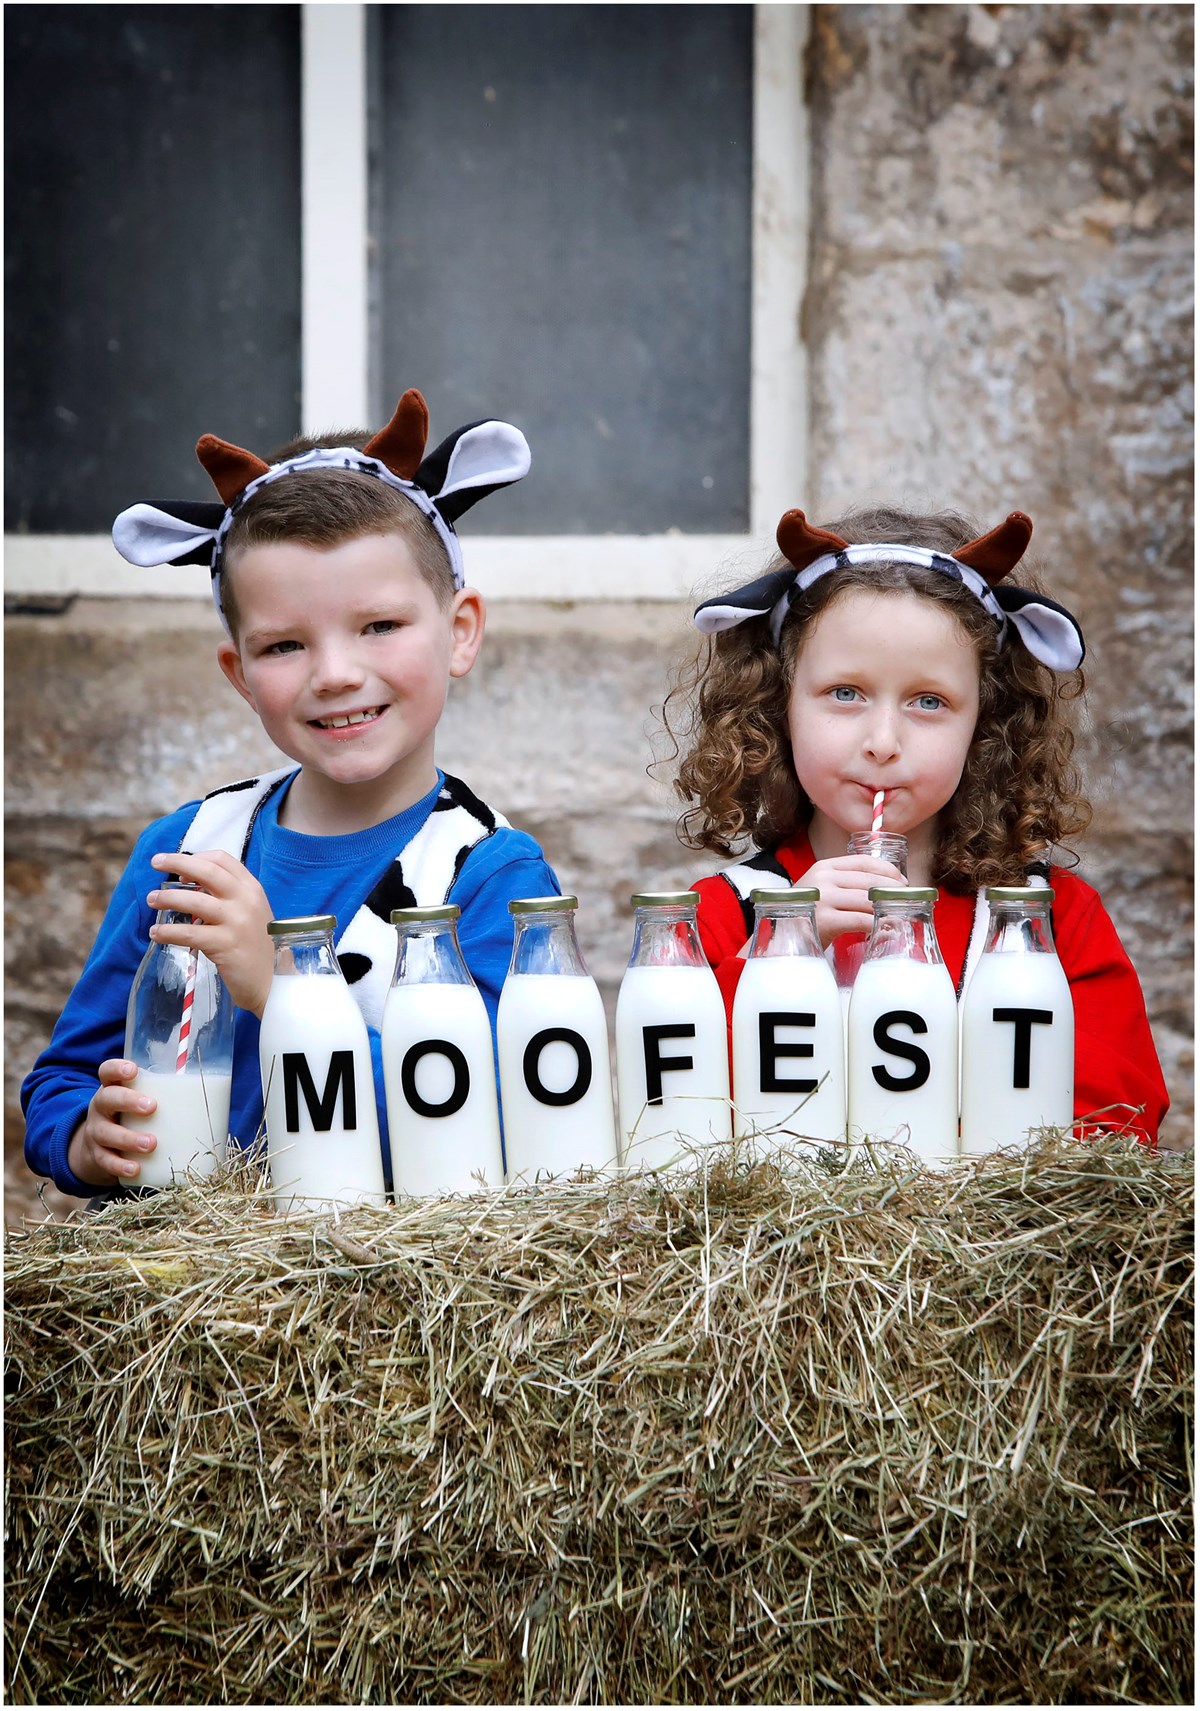 Emily Birrell and Harry Anderson from Mossneuk Primary get ready for MooFest at National Museum of Rural Life in East Kilbride this Saturday 16 and Sunday 17 September.  Supported by Players of People’s Postcode Lottery, the fun family event is a unique celebration of cattle featuring butterchurning workshops, demonstrations, trails, storytelling, crafts and food. Image credit: Paul Dodds.